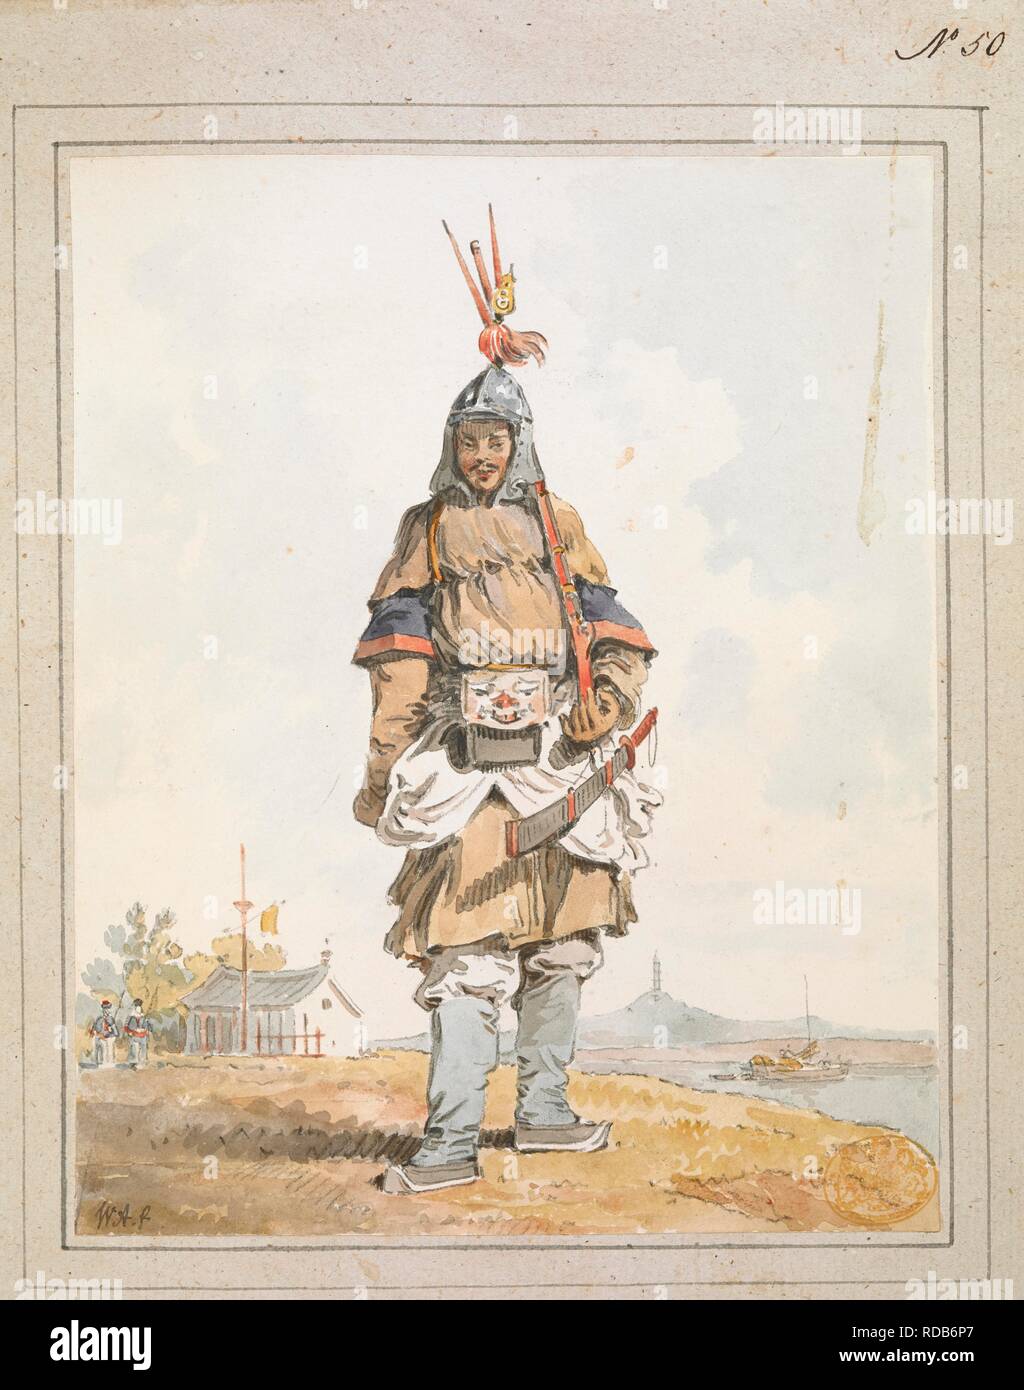 Portrait of a Chinese Soldier. Chinese soldier standing full-length facing front, wearing plumed helmet and holding a rifle over his shoulder and a sword hanging from his belt, with landscape in the background. Signed with initials at bottom left and pasted on mount with washlines. [A collection of eighty views, maps, portraits and drawings illustrative of the Embassy sent to China under George, Earl of Macartney, in 1793; drawn chiefly by William Alexander, some by Sir John Barrow, Bart., some by Sir Henry Woodbine Parish, and one by William Gomm. Many of them are engraved in Sir George Staun Stock Photo